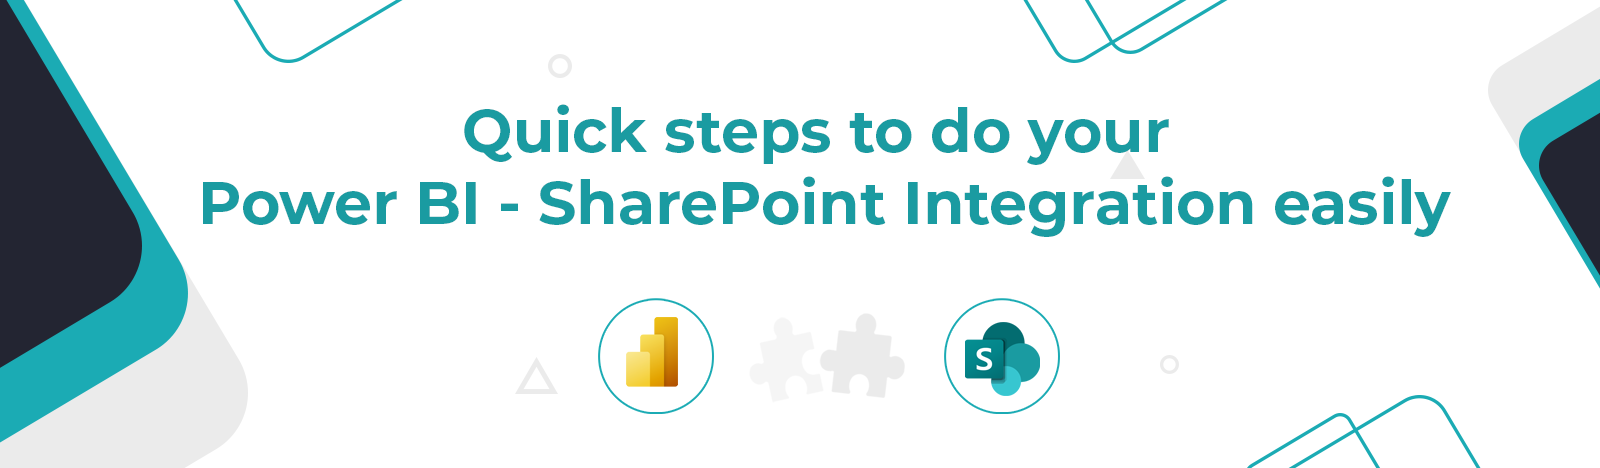 Power BI SharePoint Integrations in Quick Steps